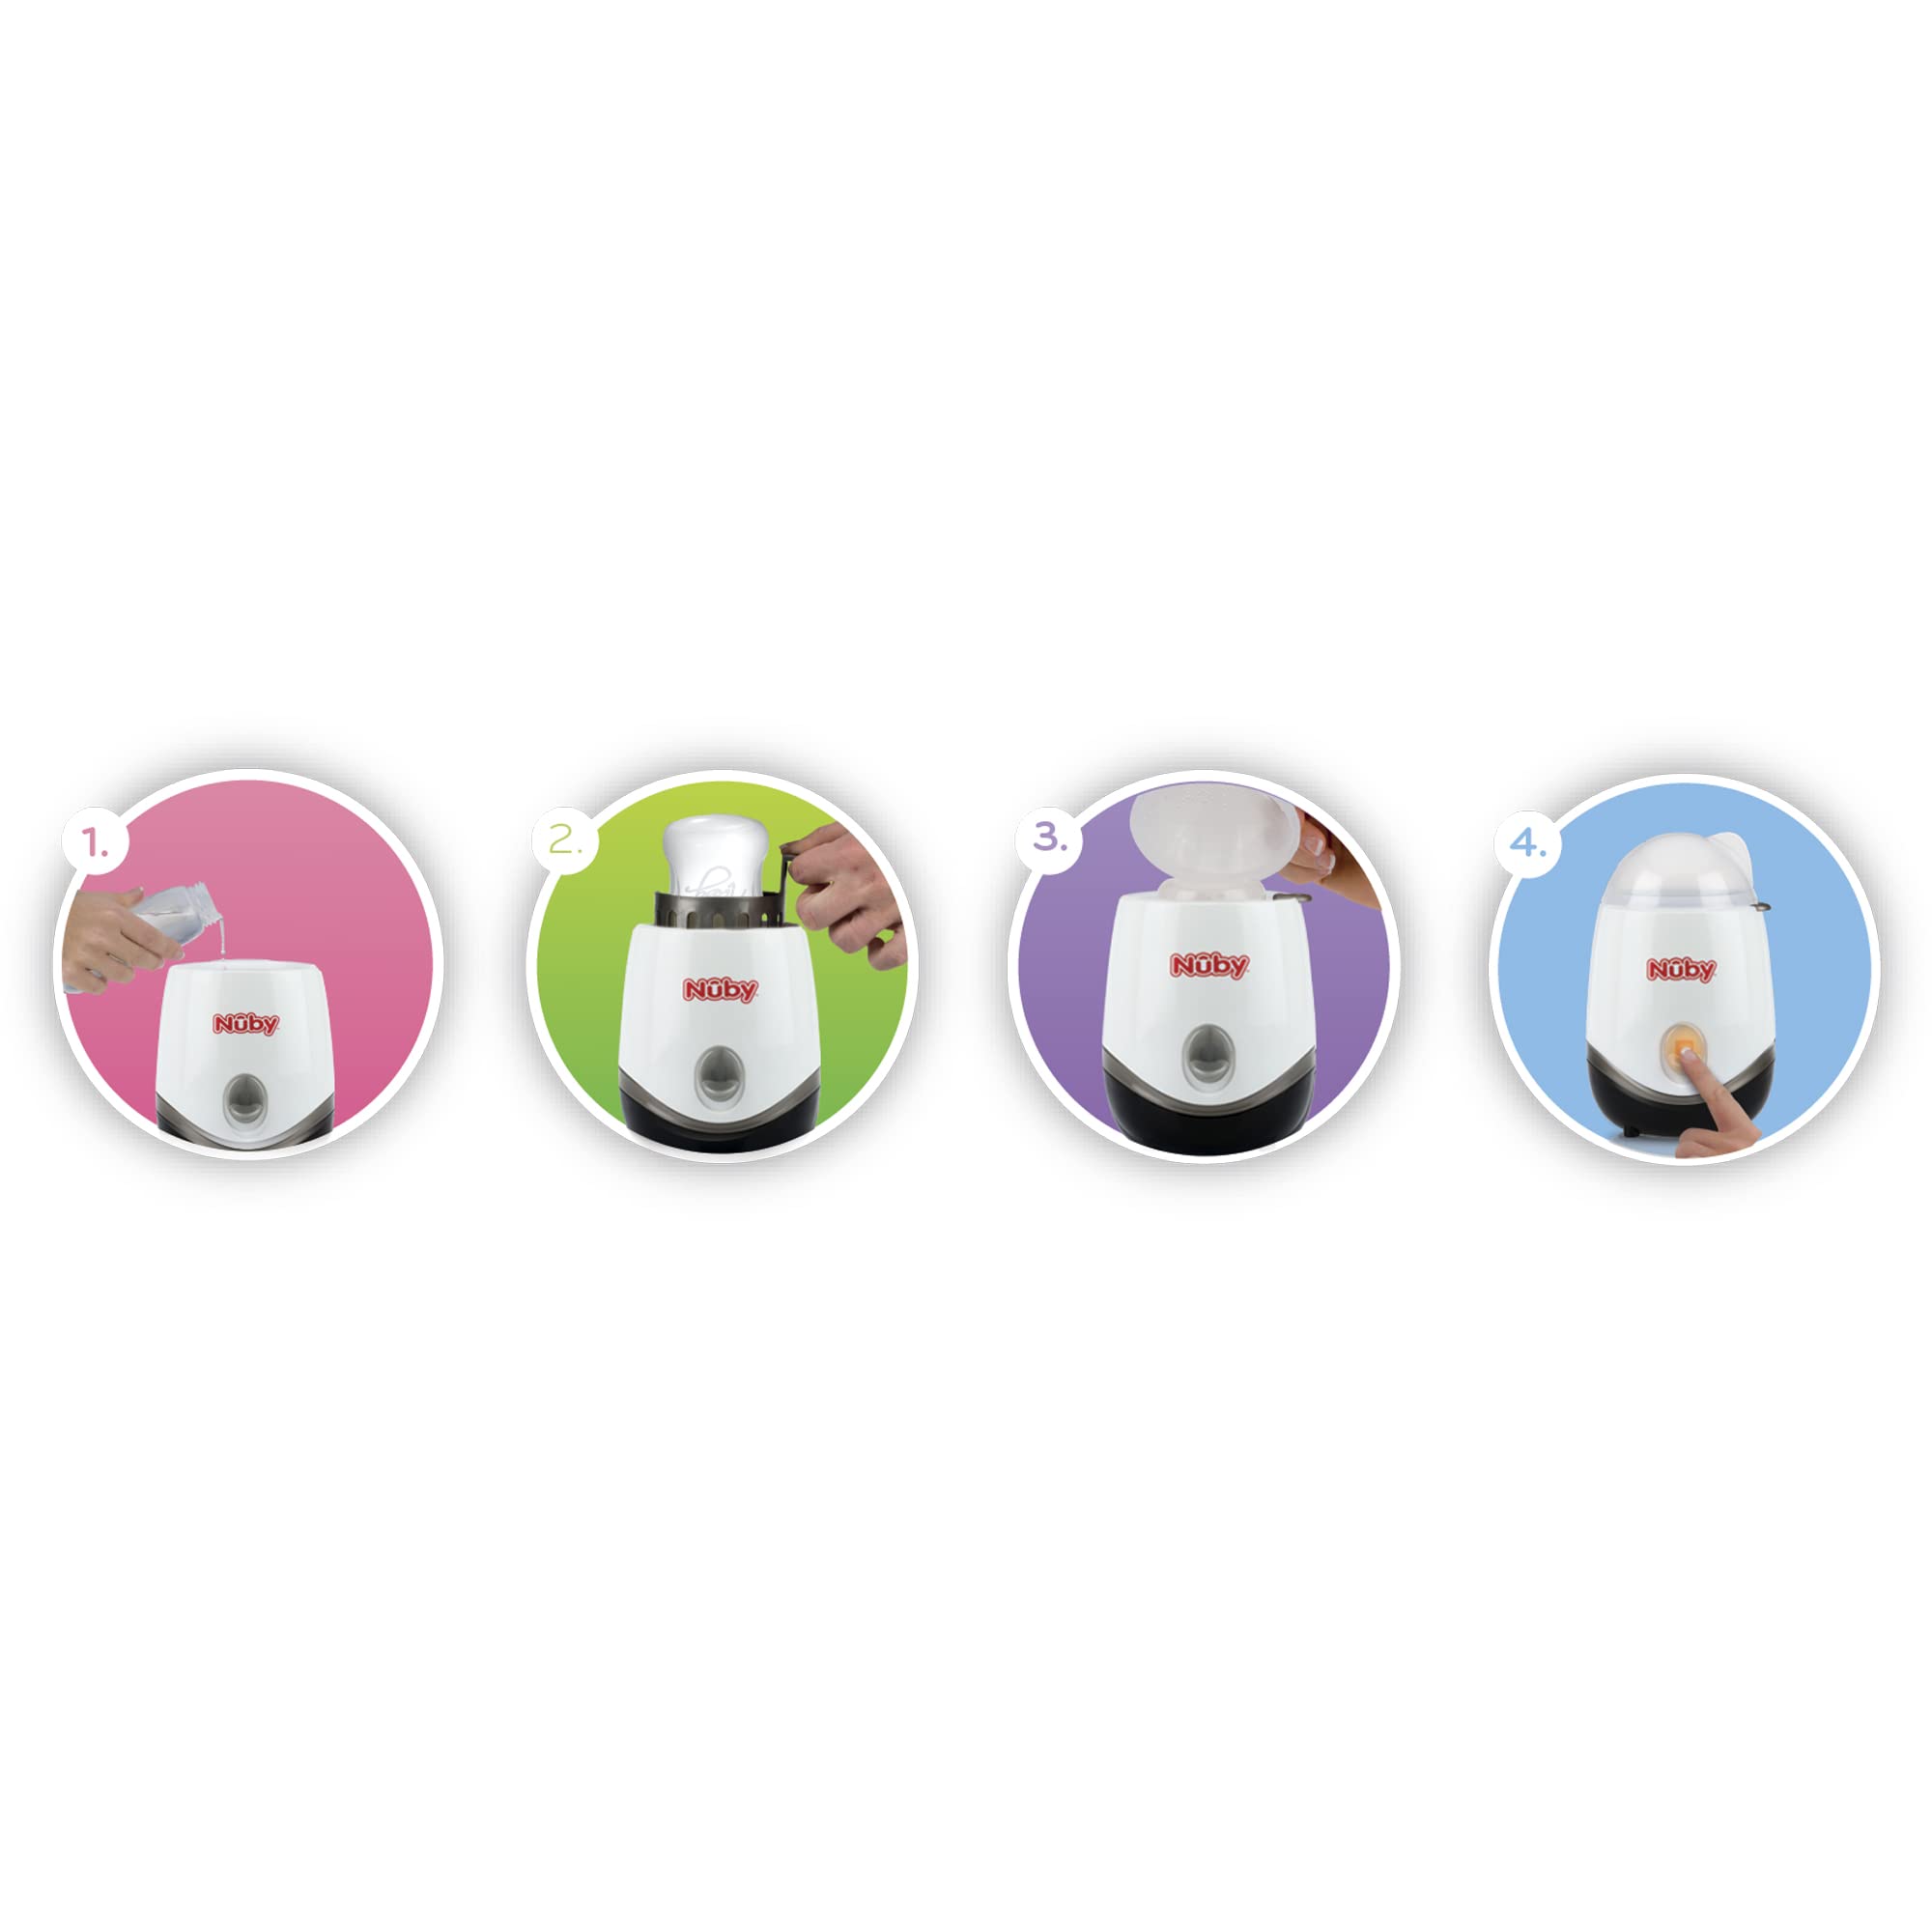 Nuby One-Touch 2-in-1 Electric Baby Bottle Warmer & Sterilizer